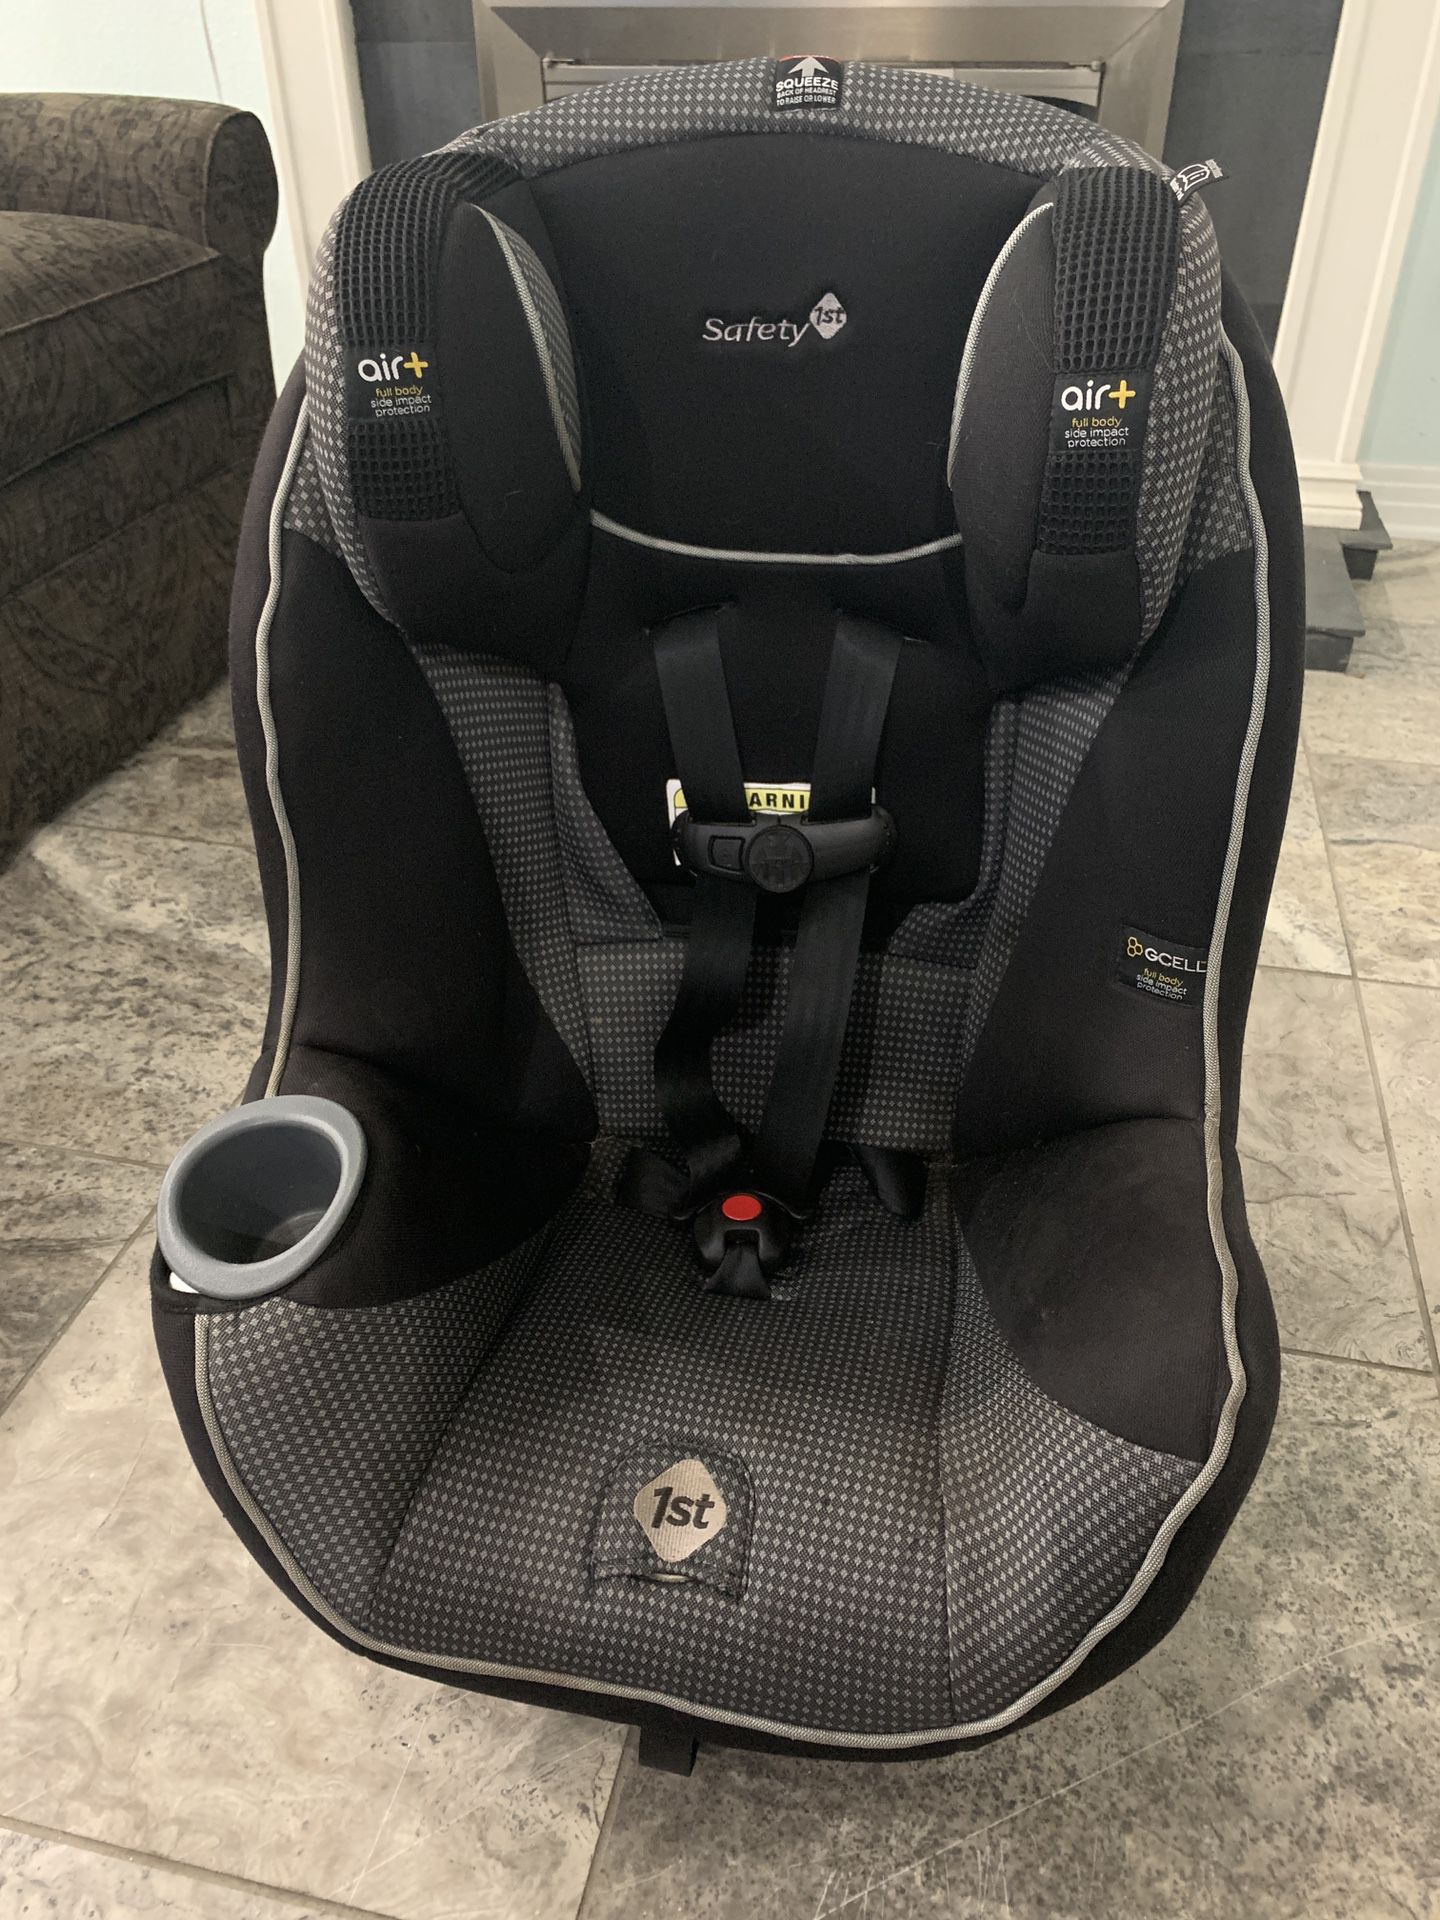 Safety 1st Advance SE 65 Air+ Convertible Car Seat